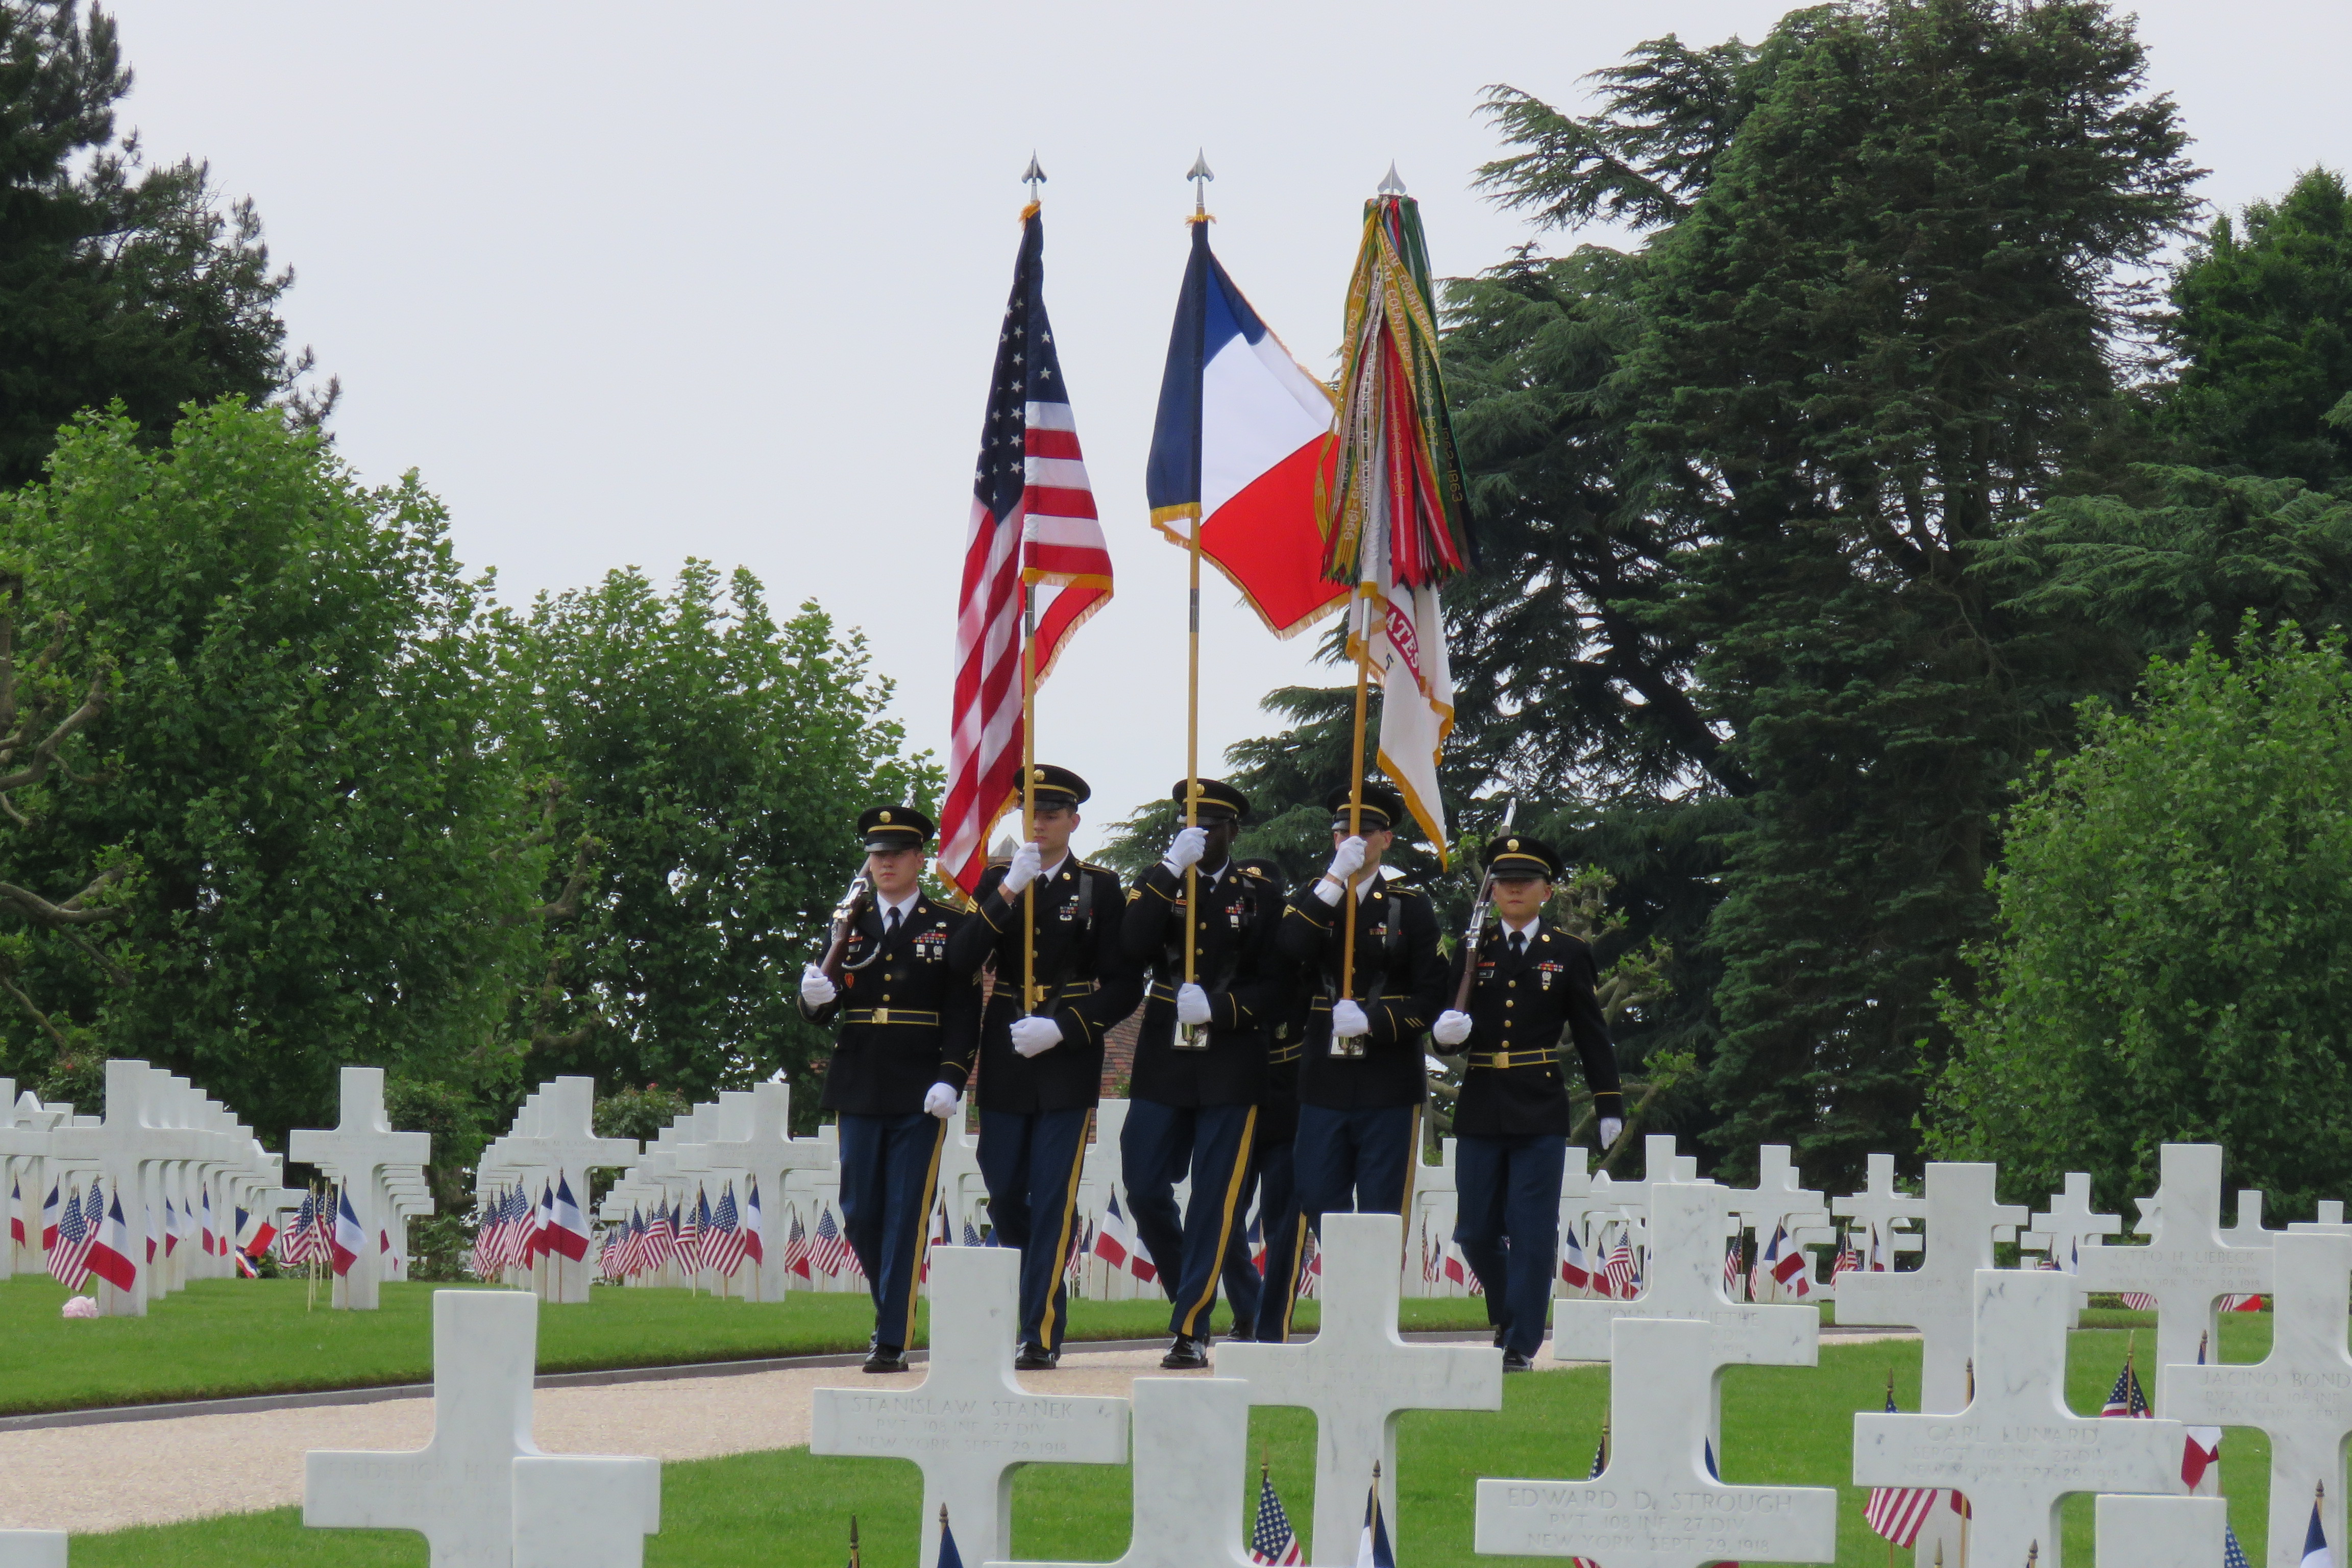 Members of the Honor Guard march through the cemetery.